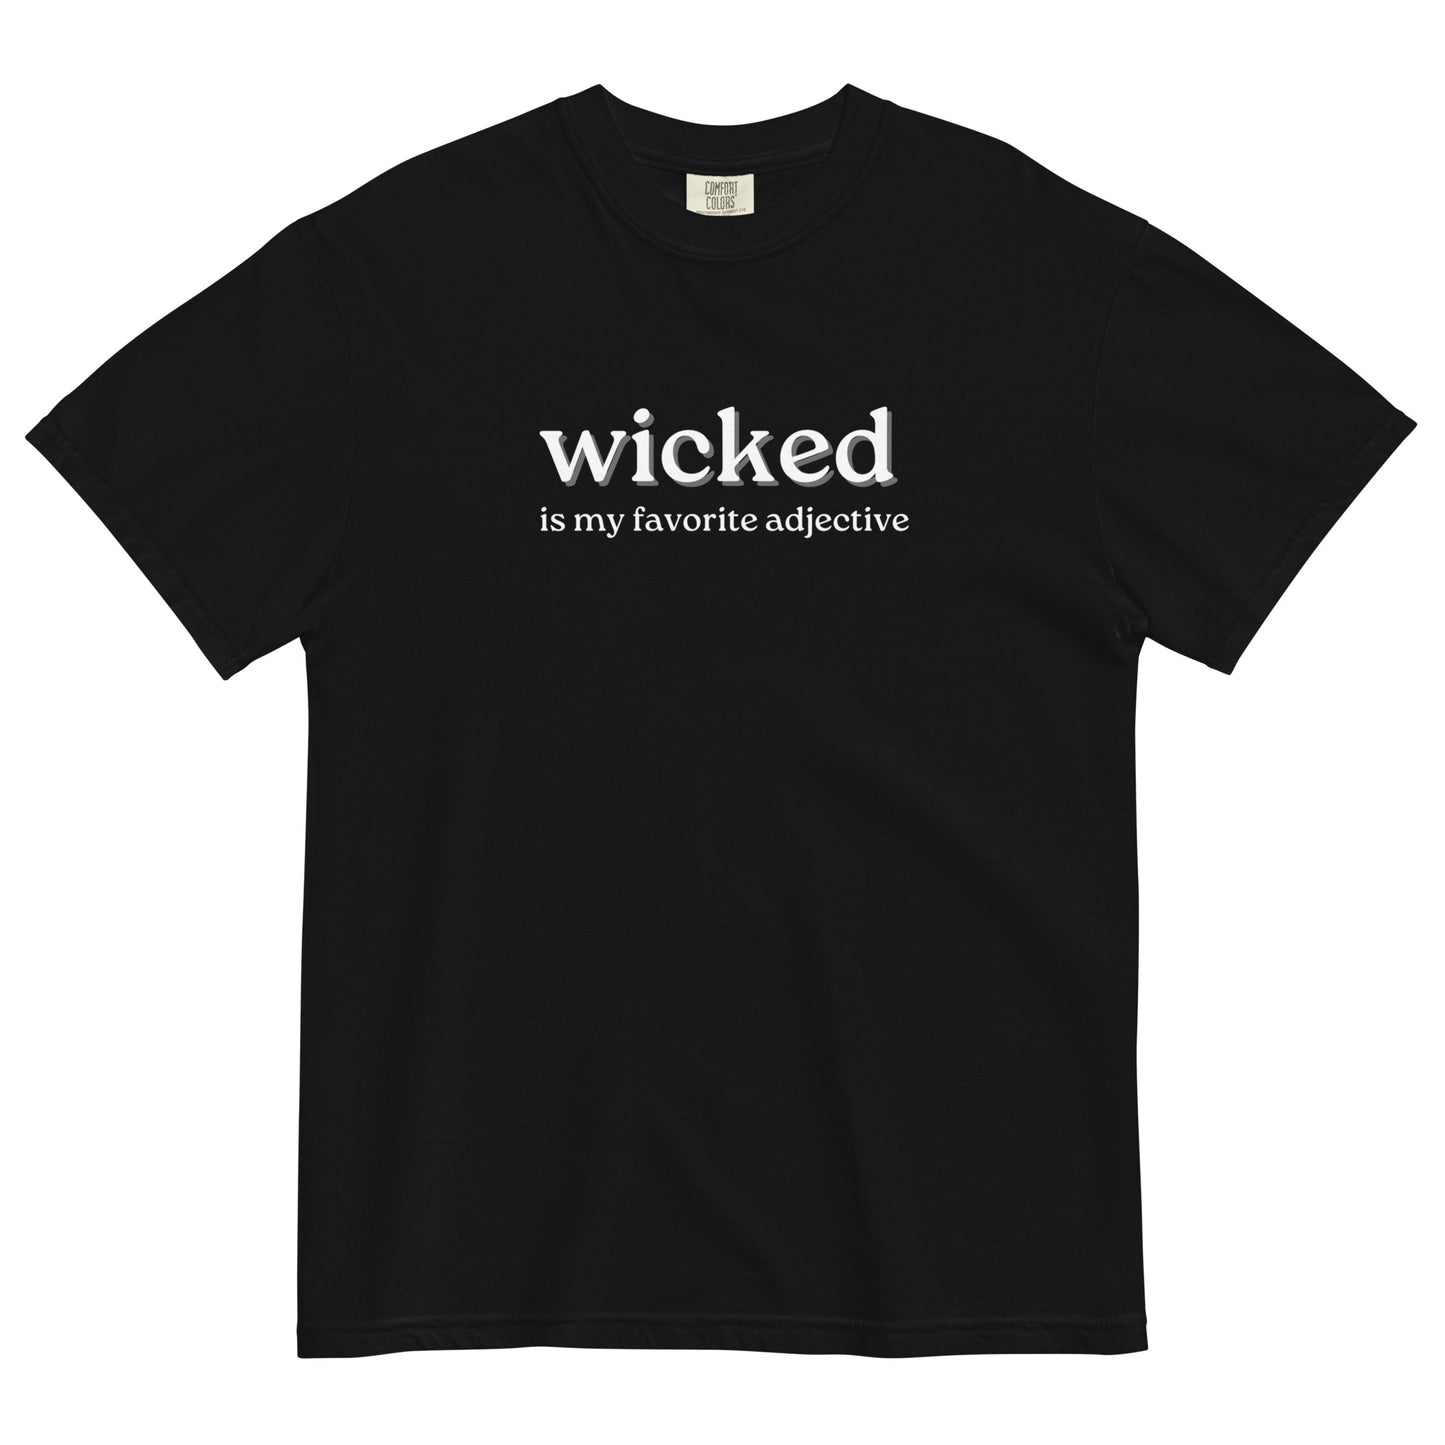 black tshirt that says "wicked is my favorite adjective" in white lettering